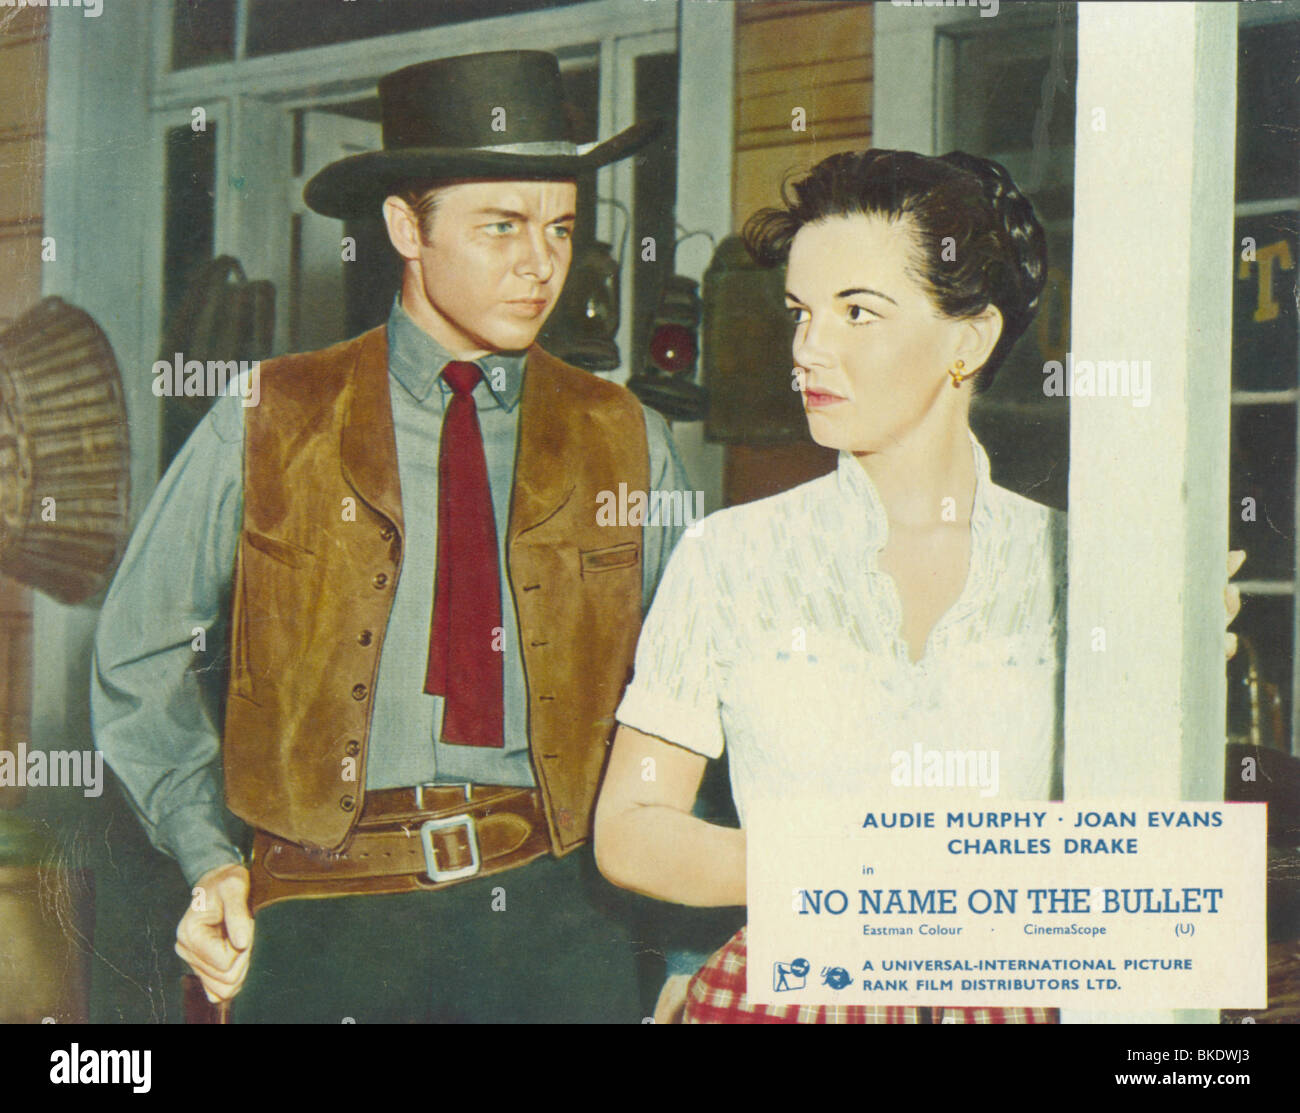 NO NAME ON THE BULLET (1958) AUDIE MURPHY, JOAN EVANS NNOB 001FOH Stock  Photo - Alamy